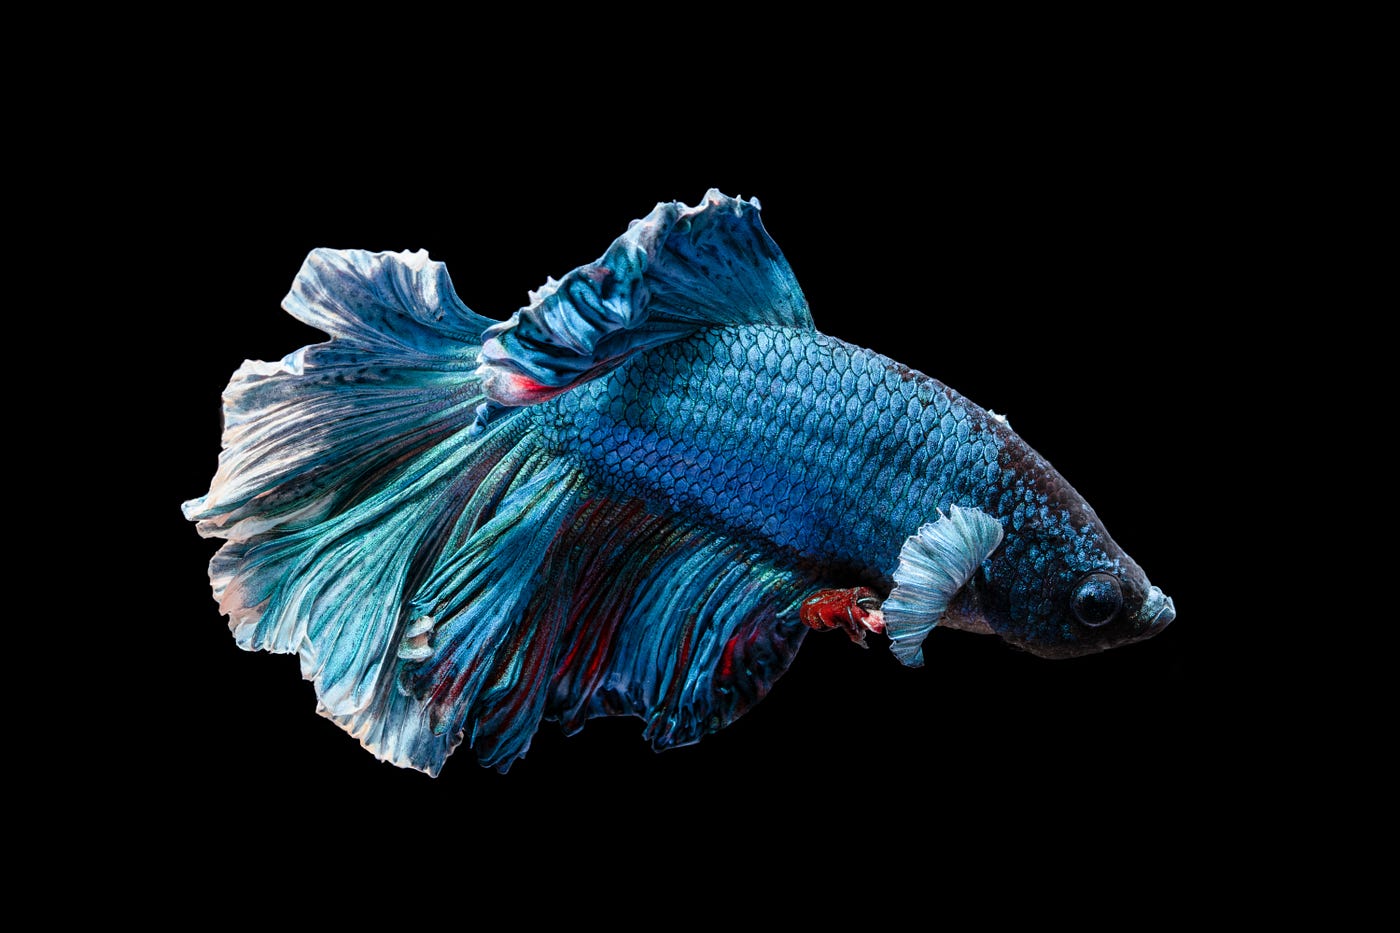 Betta Off Dead. As a kid, I had a Betta. Well, that's…, by Thomas James, The Vicious Circle